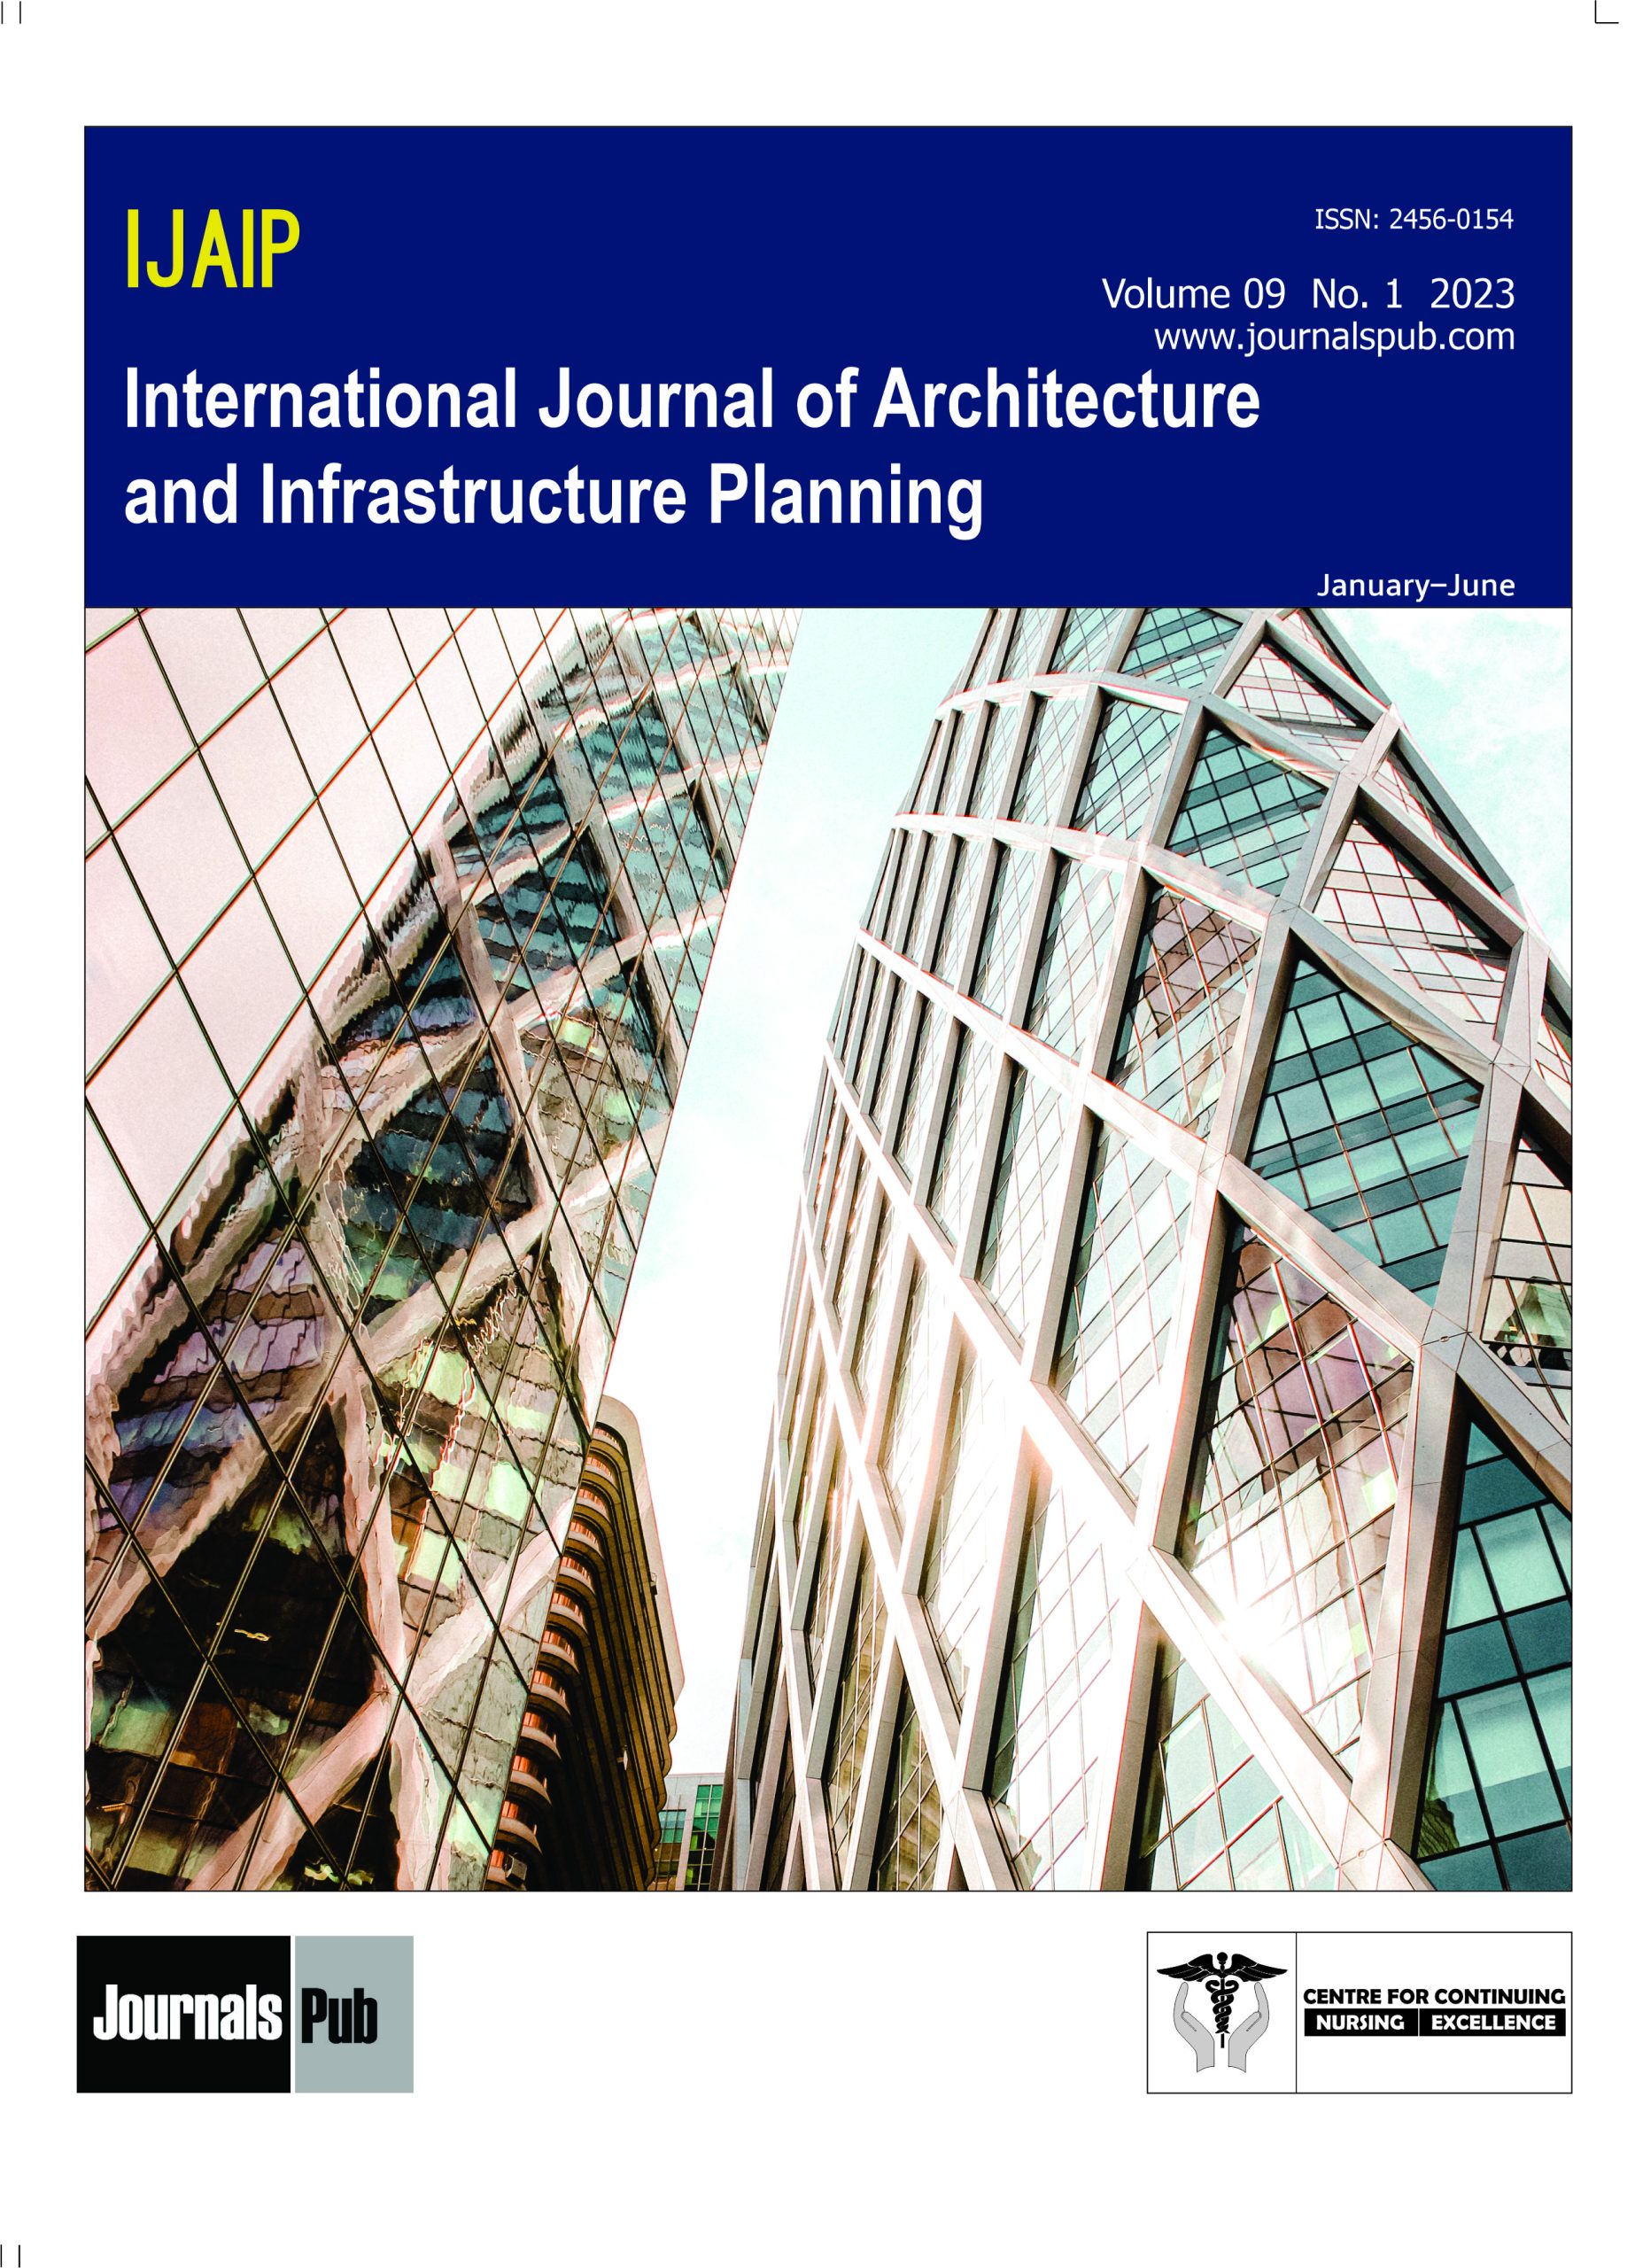 International Journal of Architecture and Infrastructure Planning Cover